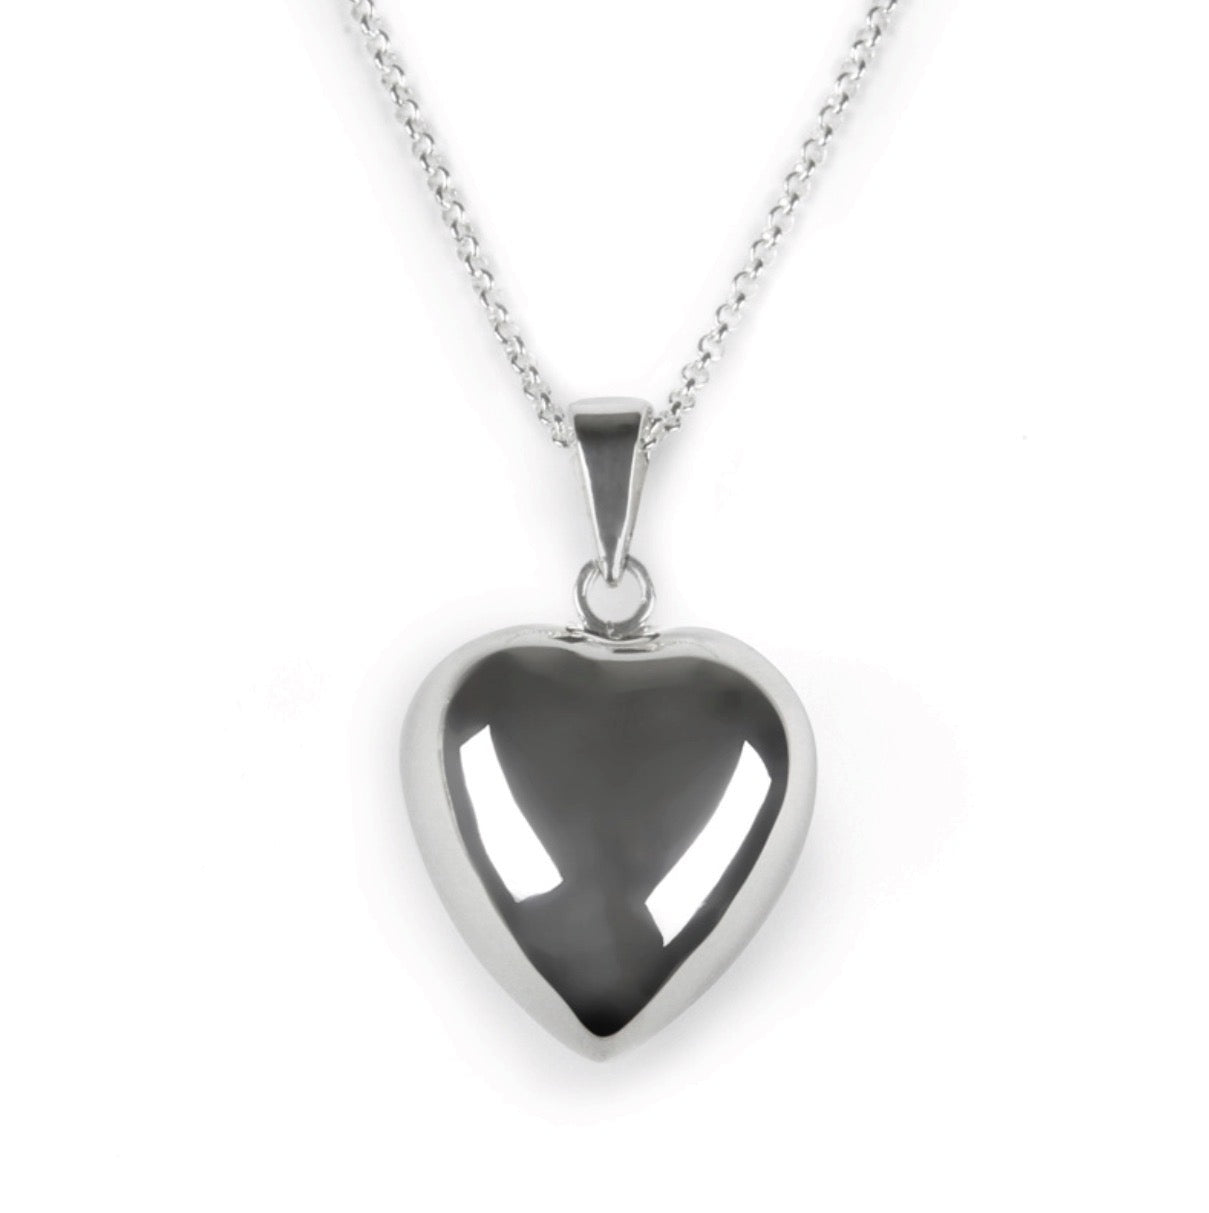 Tales From The Earth Chiming Heart Necklace